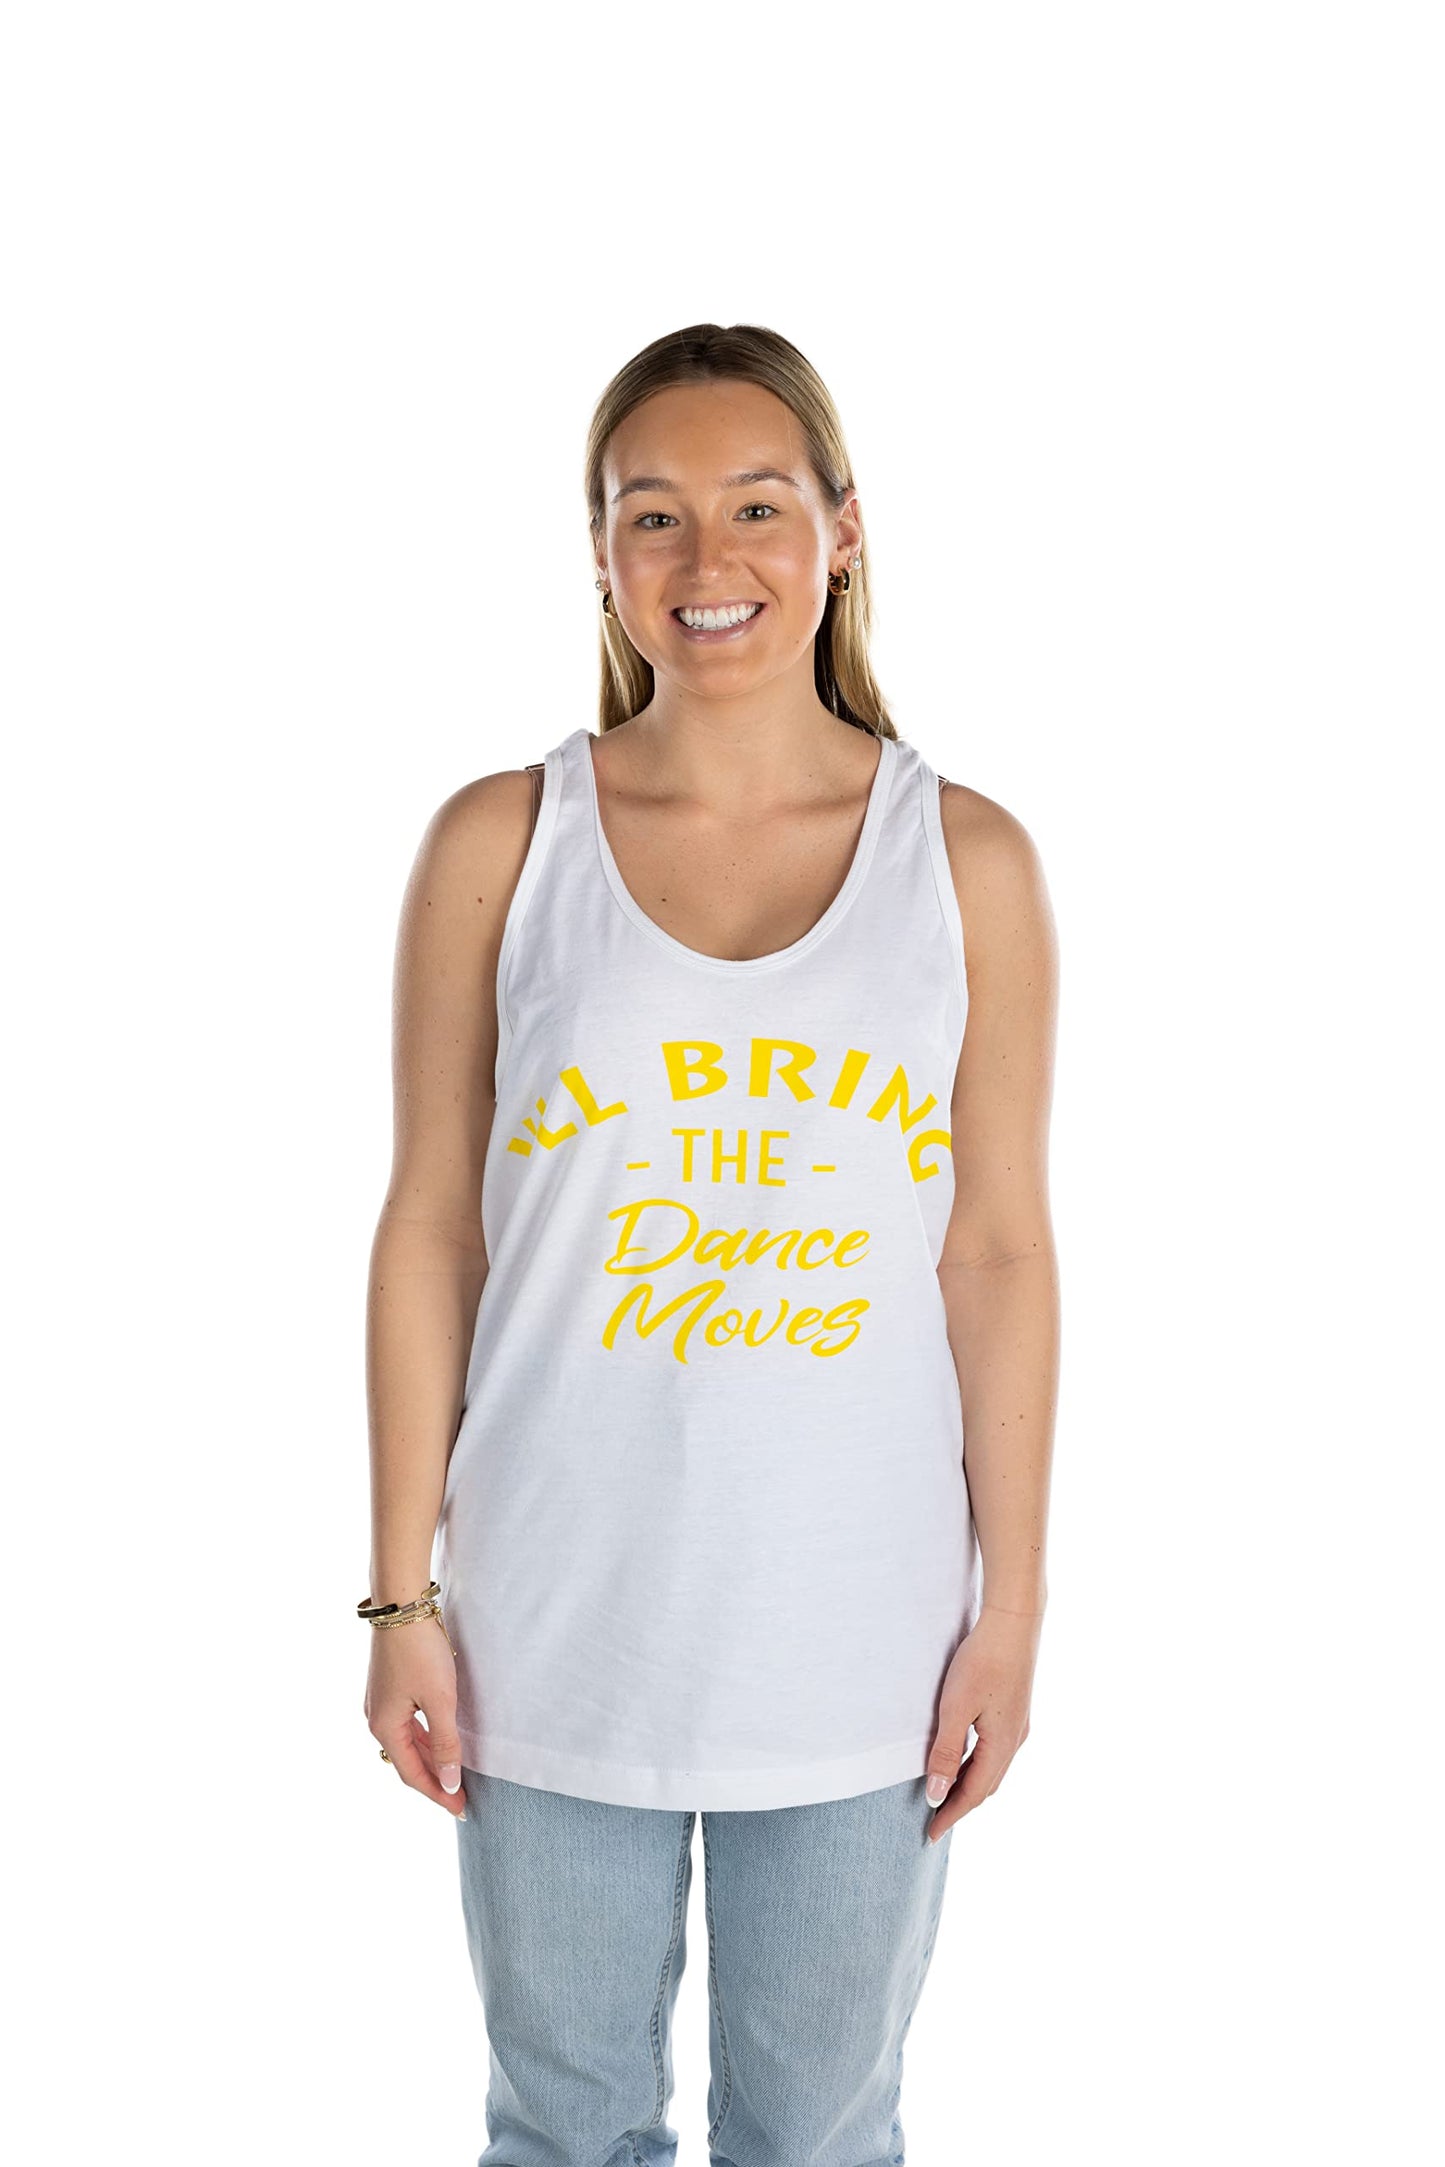 I'll Bring The Party Tank Top for Women by Funky Junque